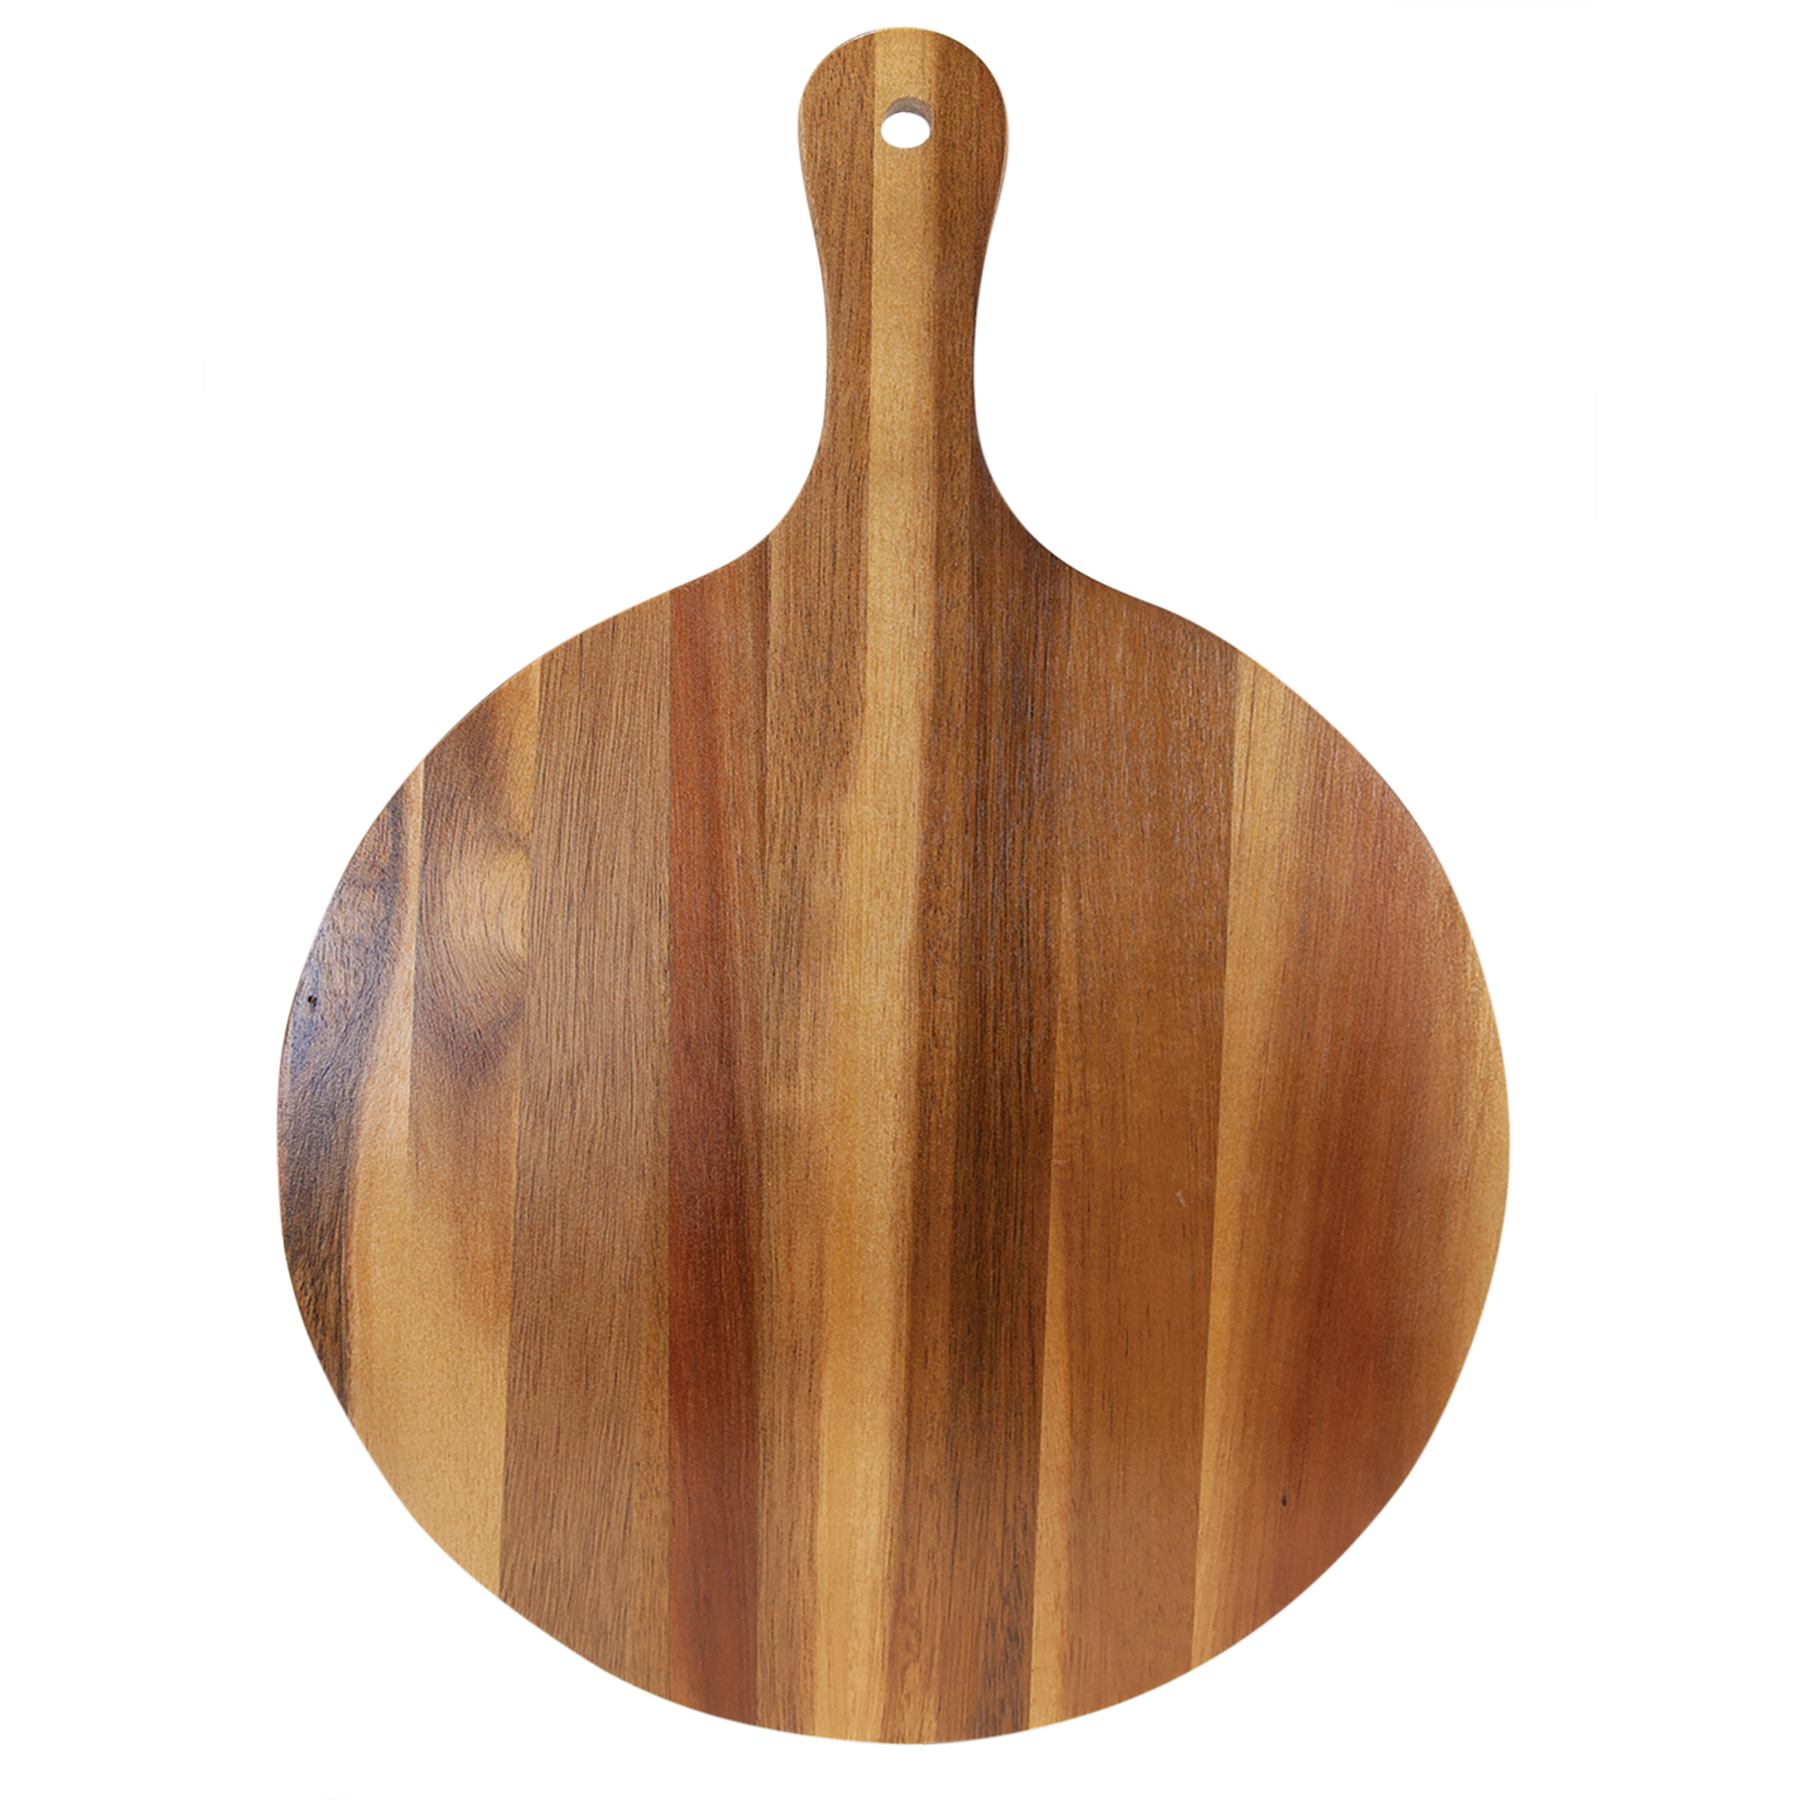 10 1/2" x 14 1/2" Round Acacia Wood/Slate Serving Board with Handle